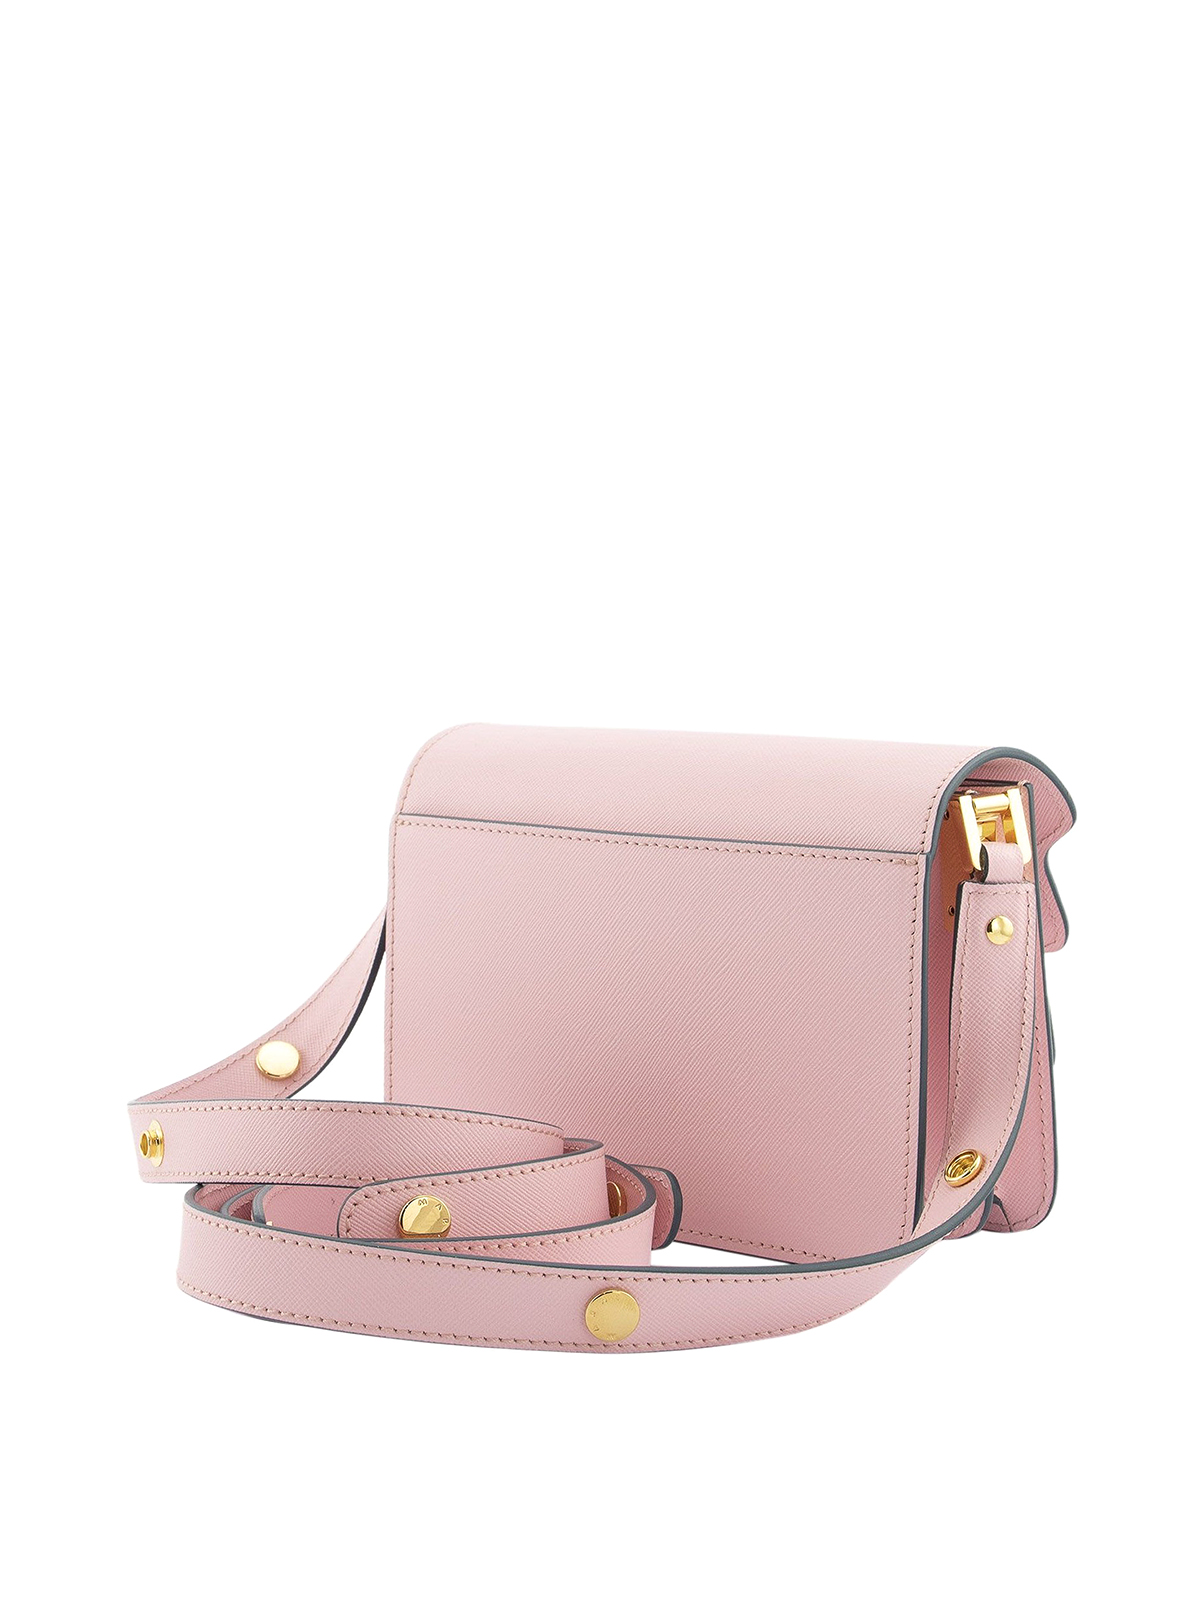 Trunk Mini Bag in Pink Leather